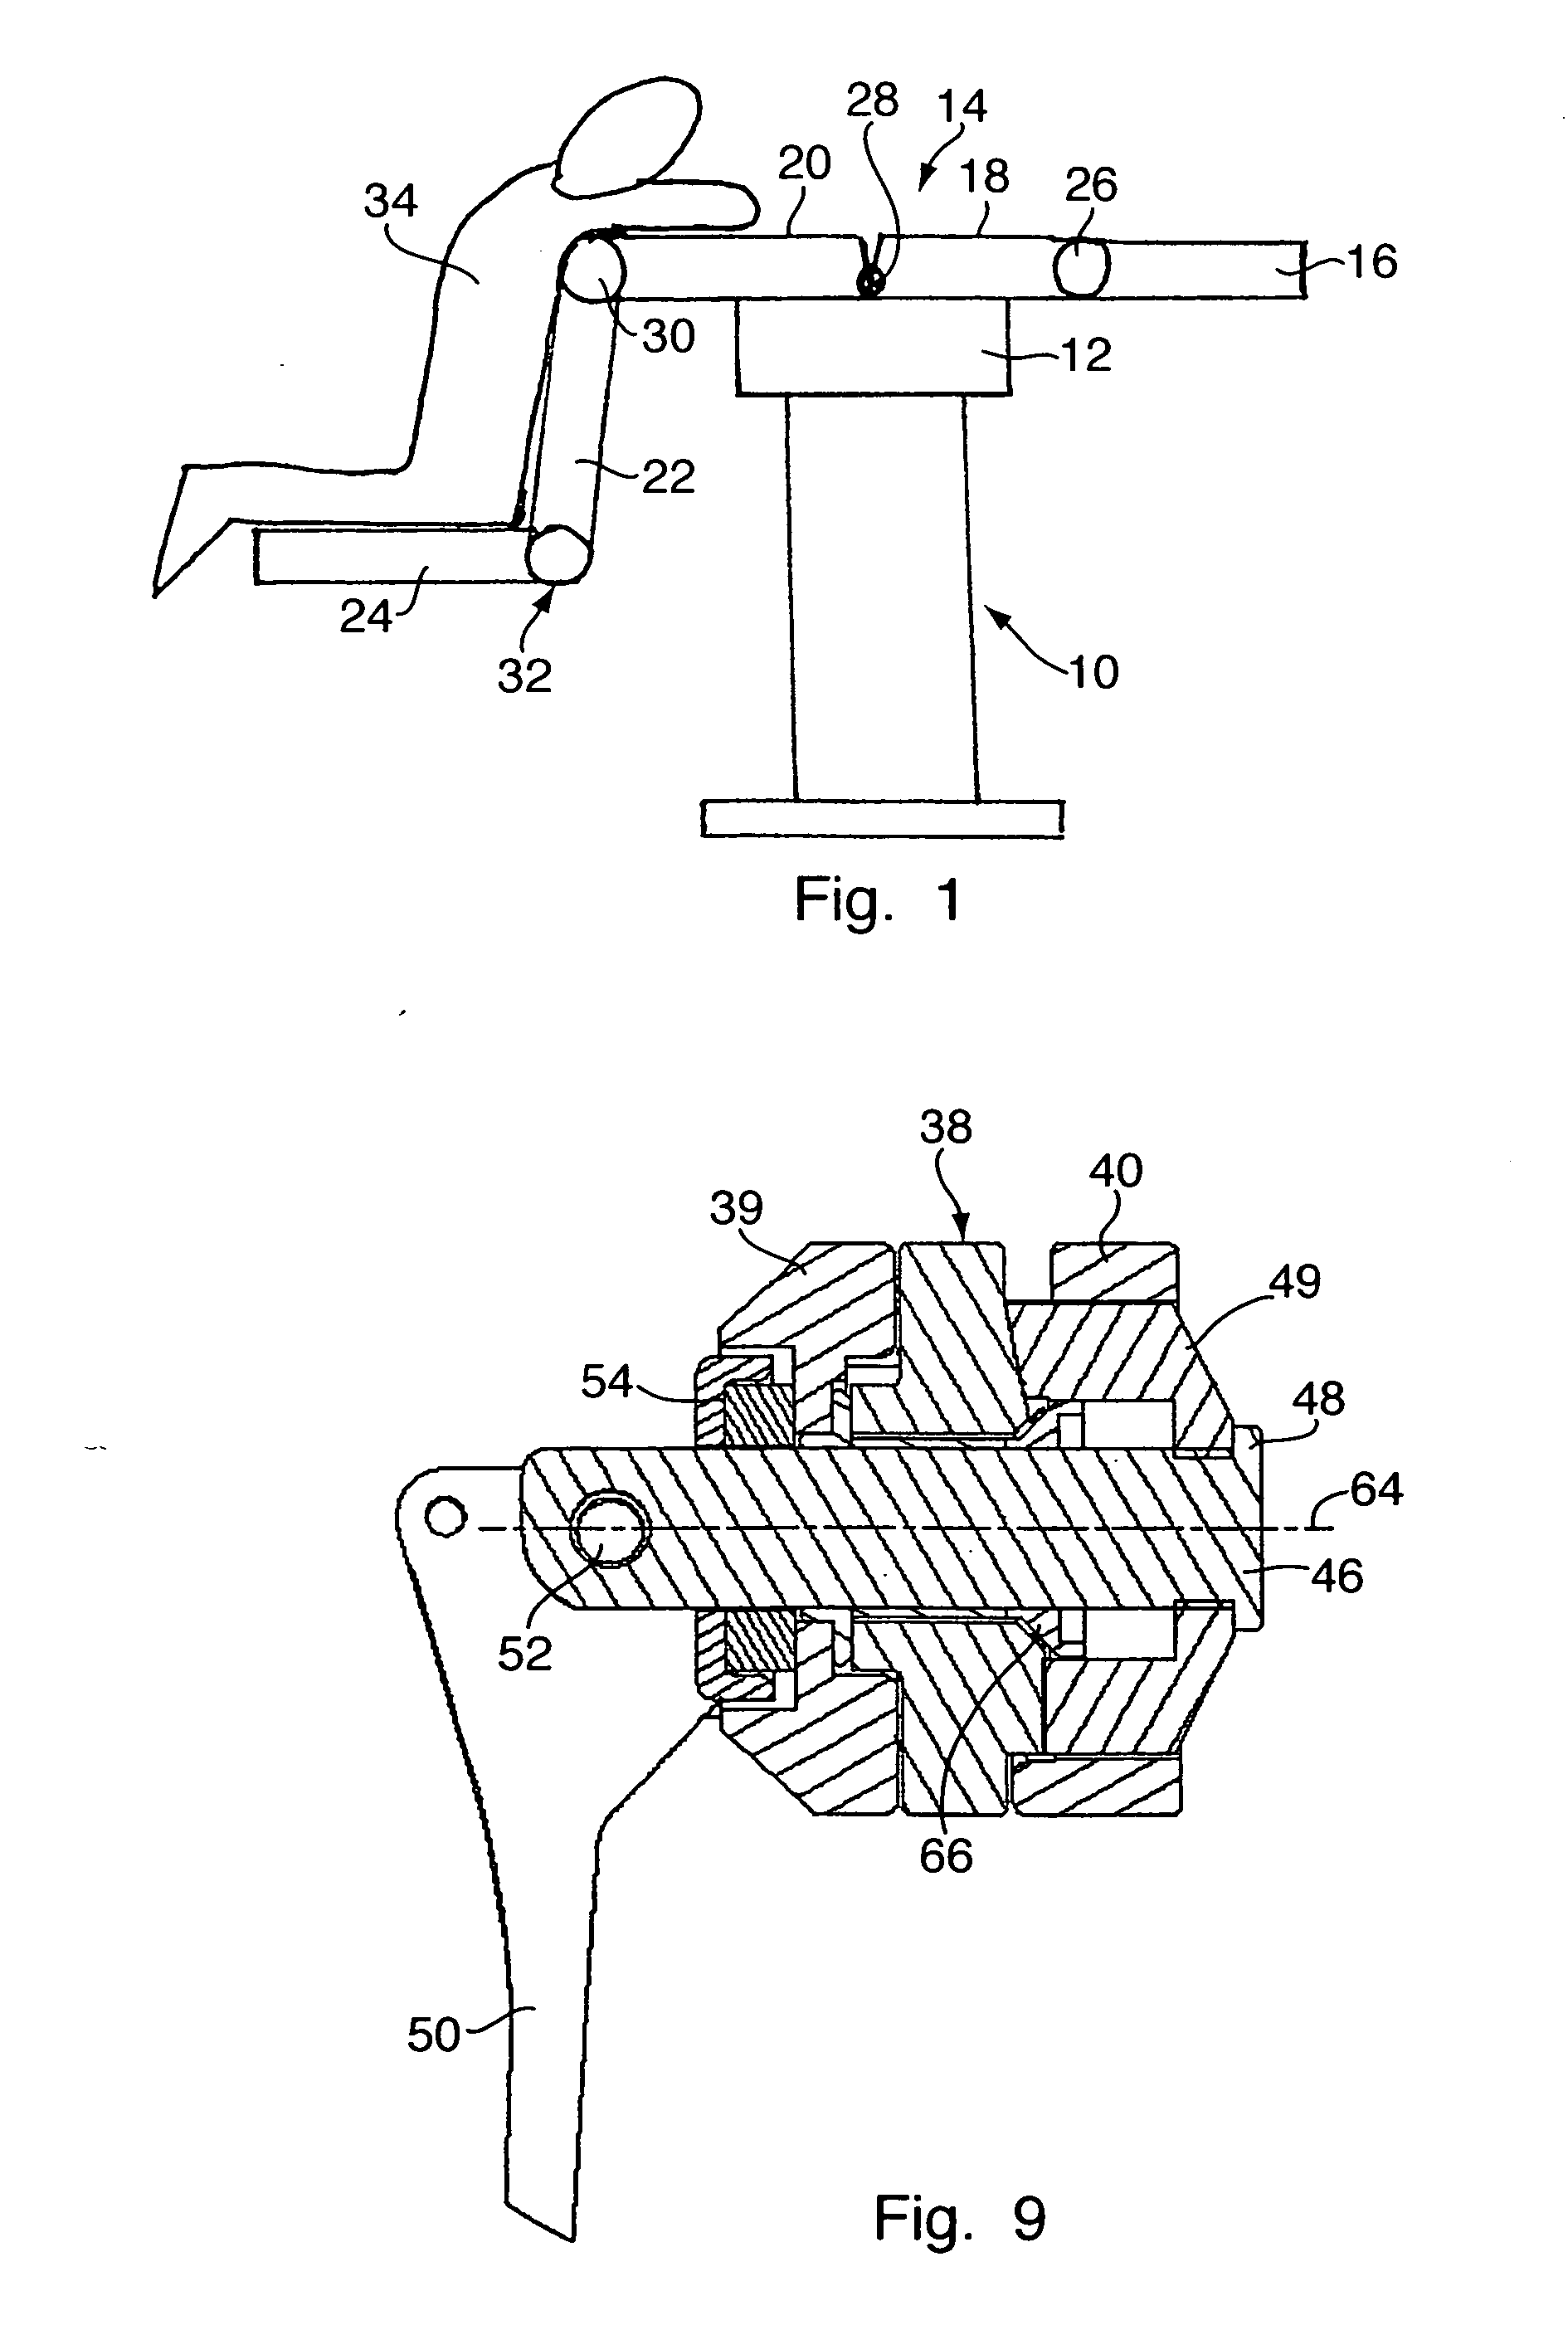 Joint arrangement for the connection of two segments of a patient bed